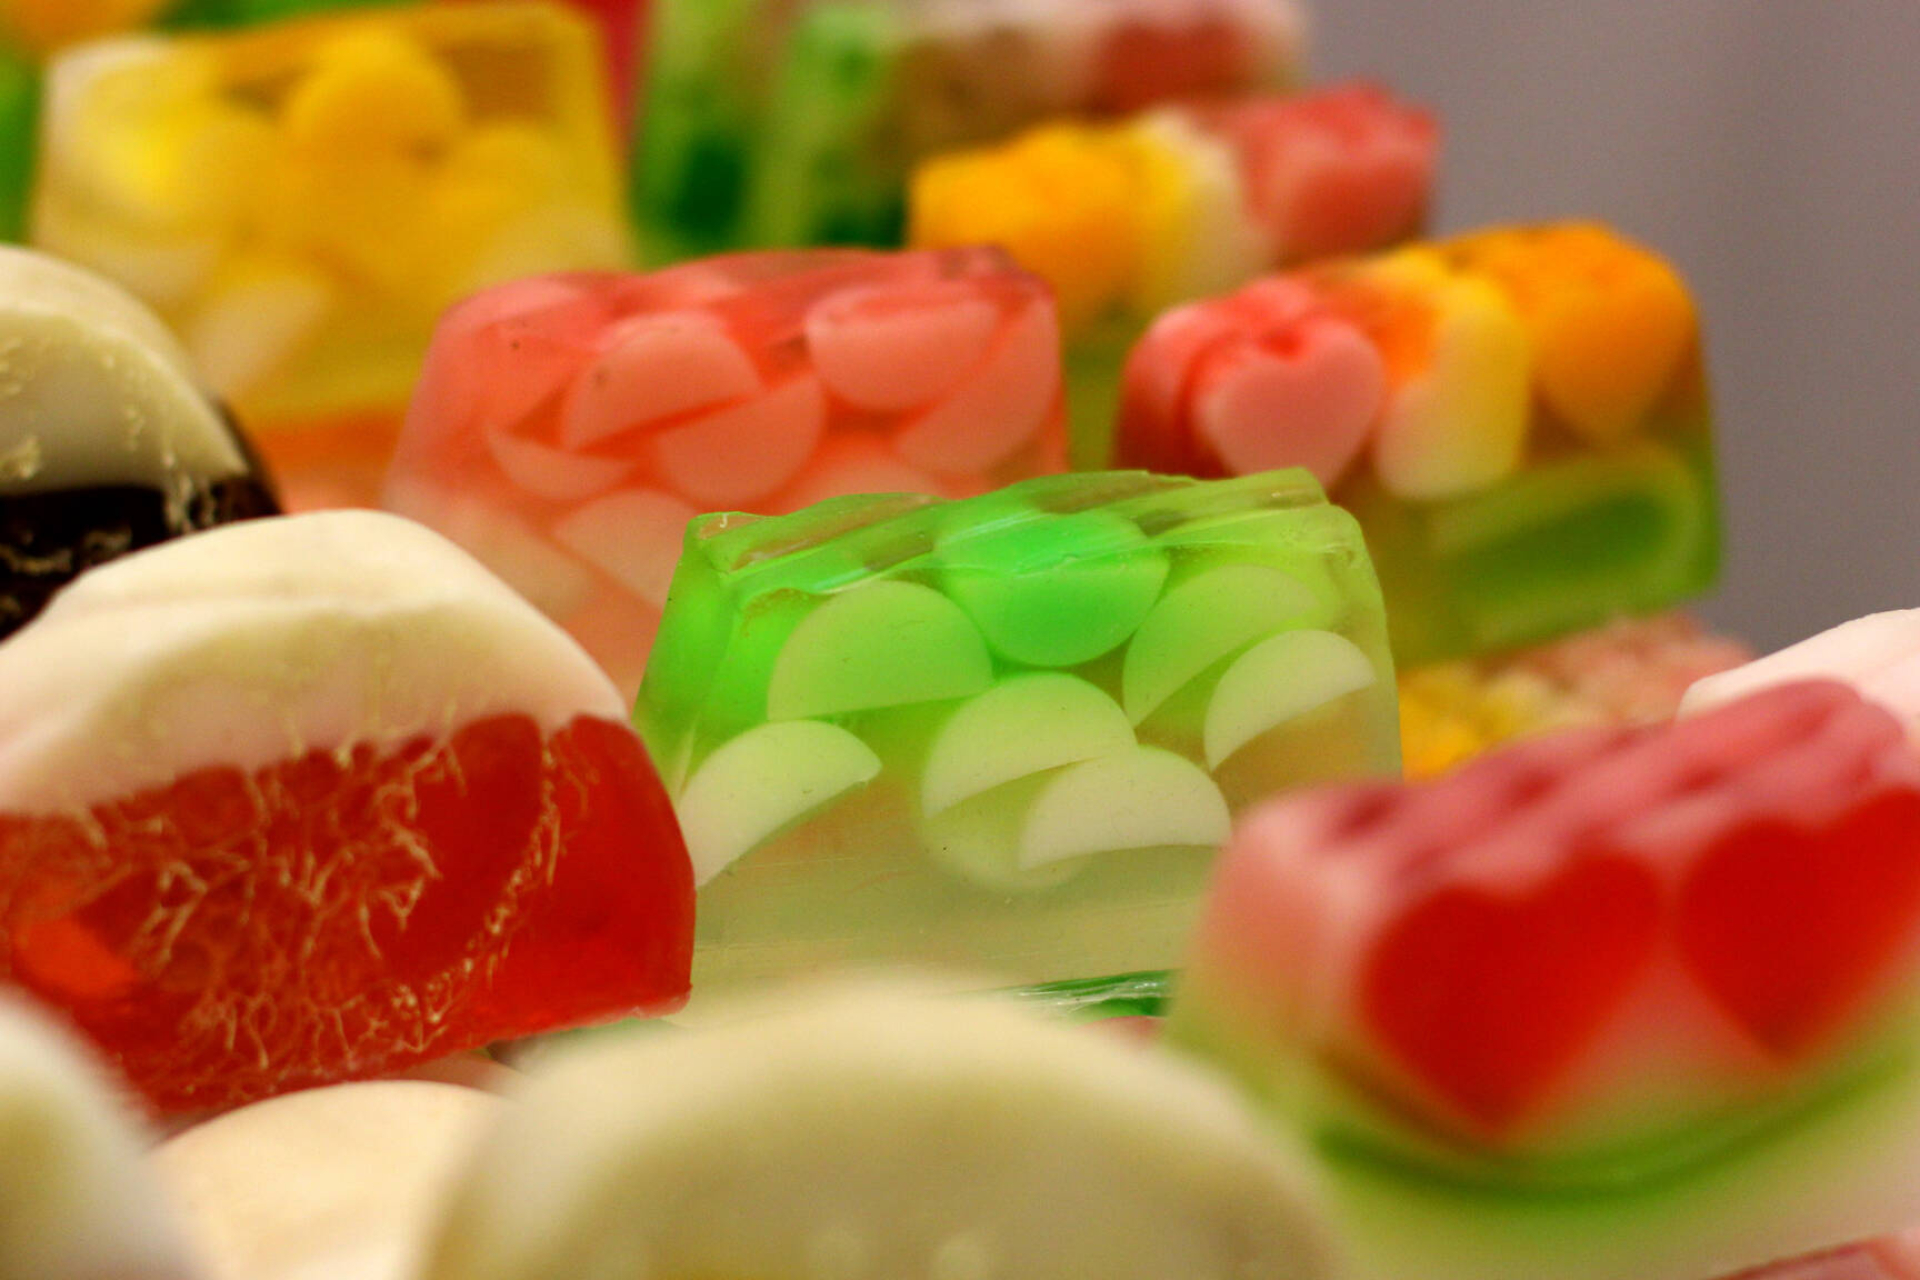 Jelly and fruit medley, Sweet gummy goodness, Colorful candy array, Sugary treats, 1920x1280 HD Desktop